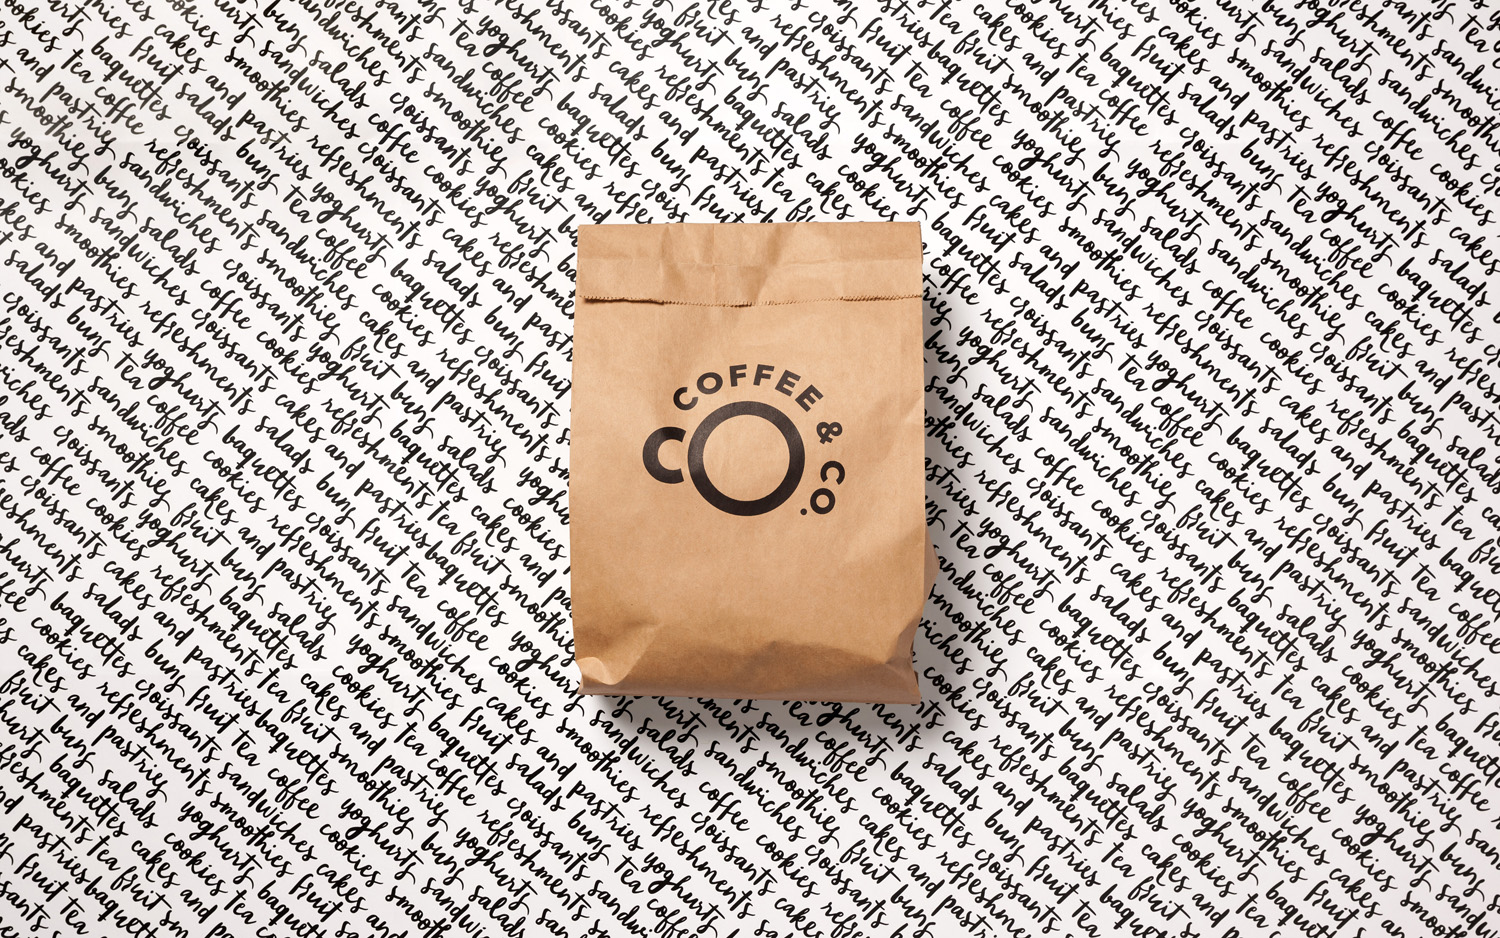 Brand identity and packaging by Bond for cruise ship cafeteria concept Coffee & Co.